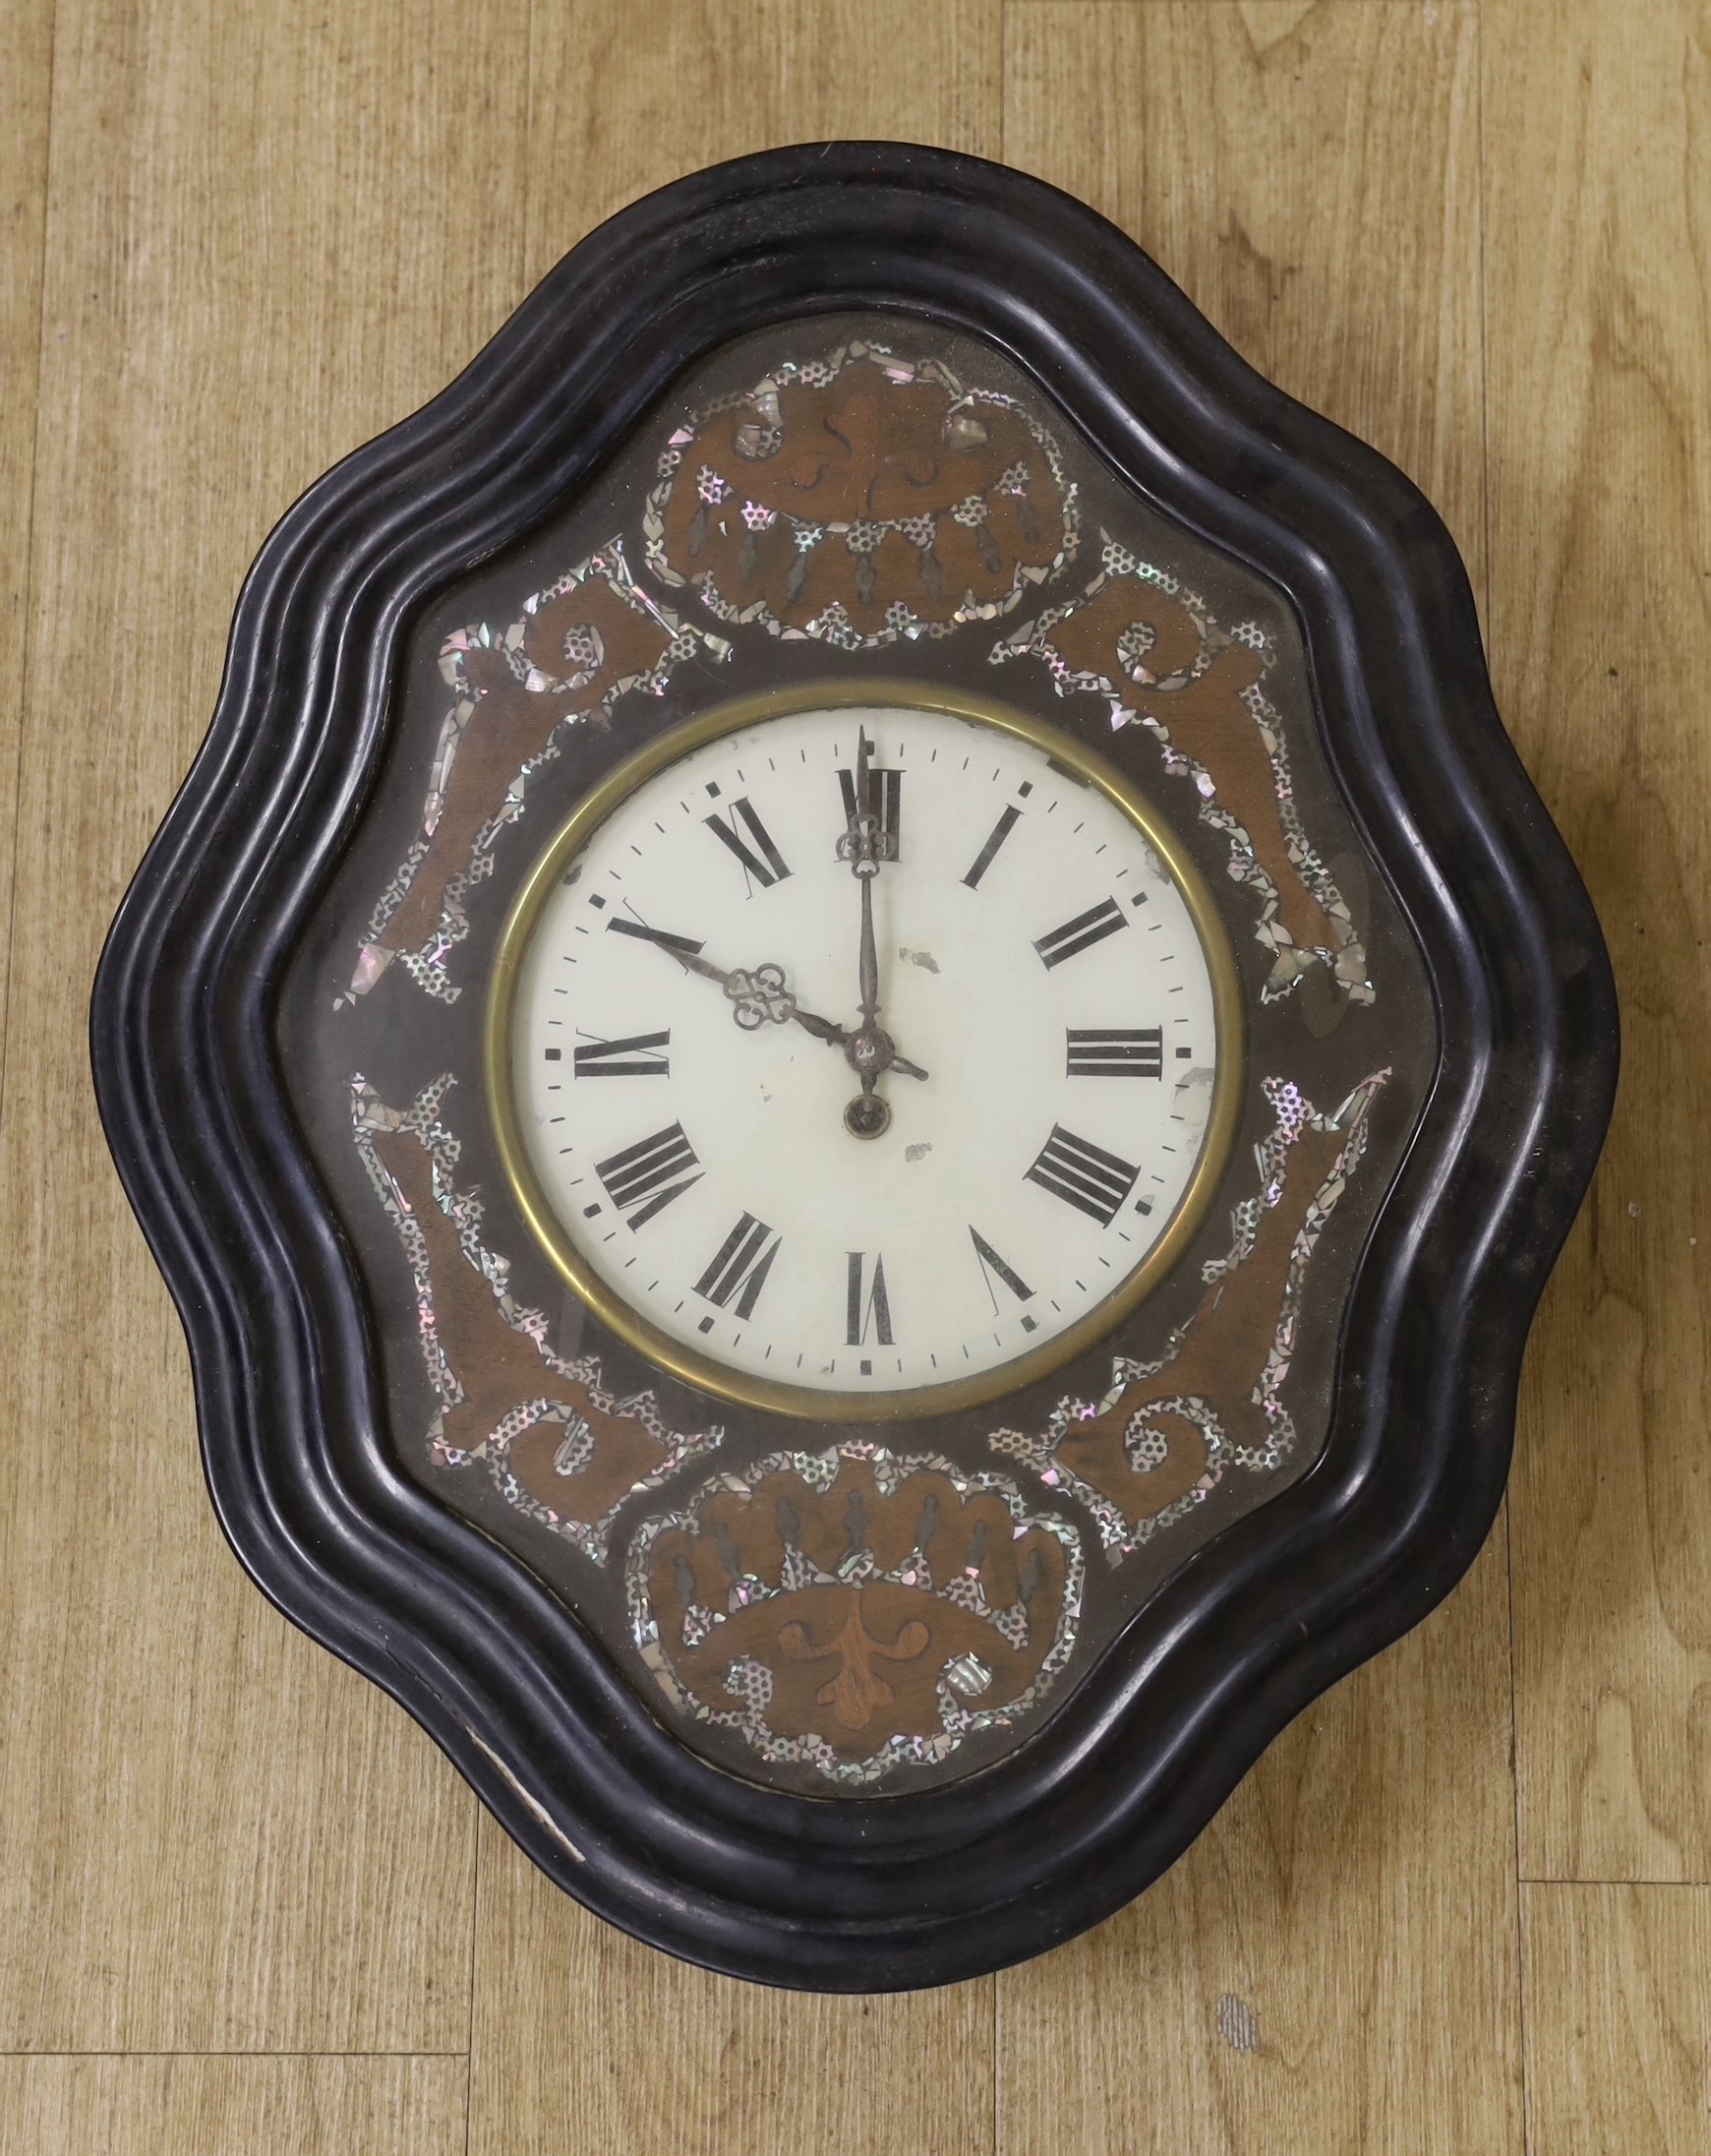 A 19th century French wall clock, with mother of pearl decorative face, 62 cms high x 50 cms wide